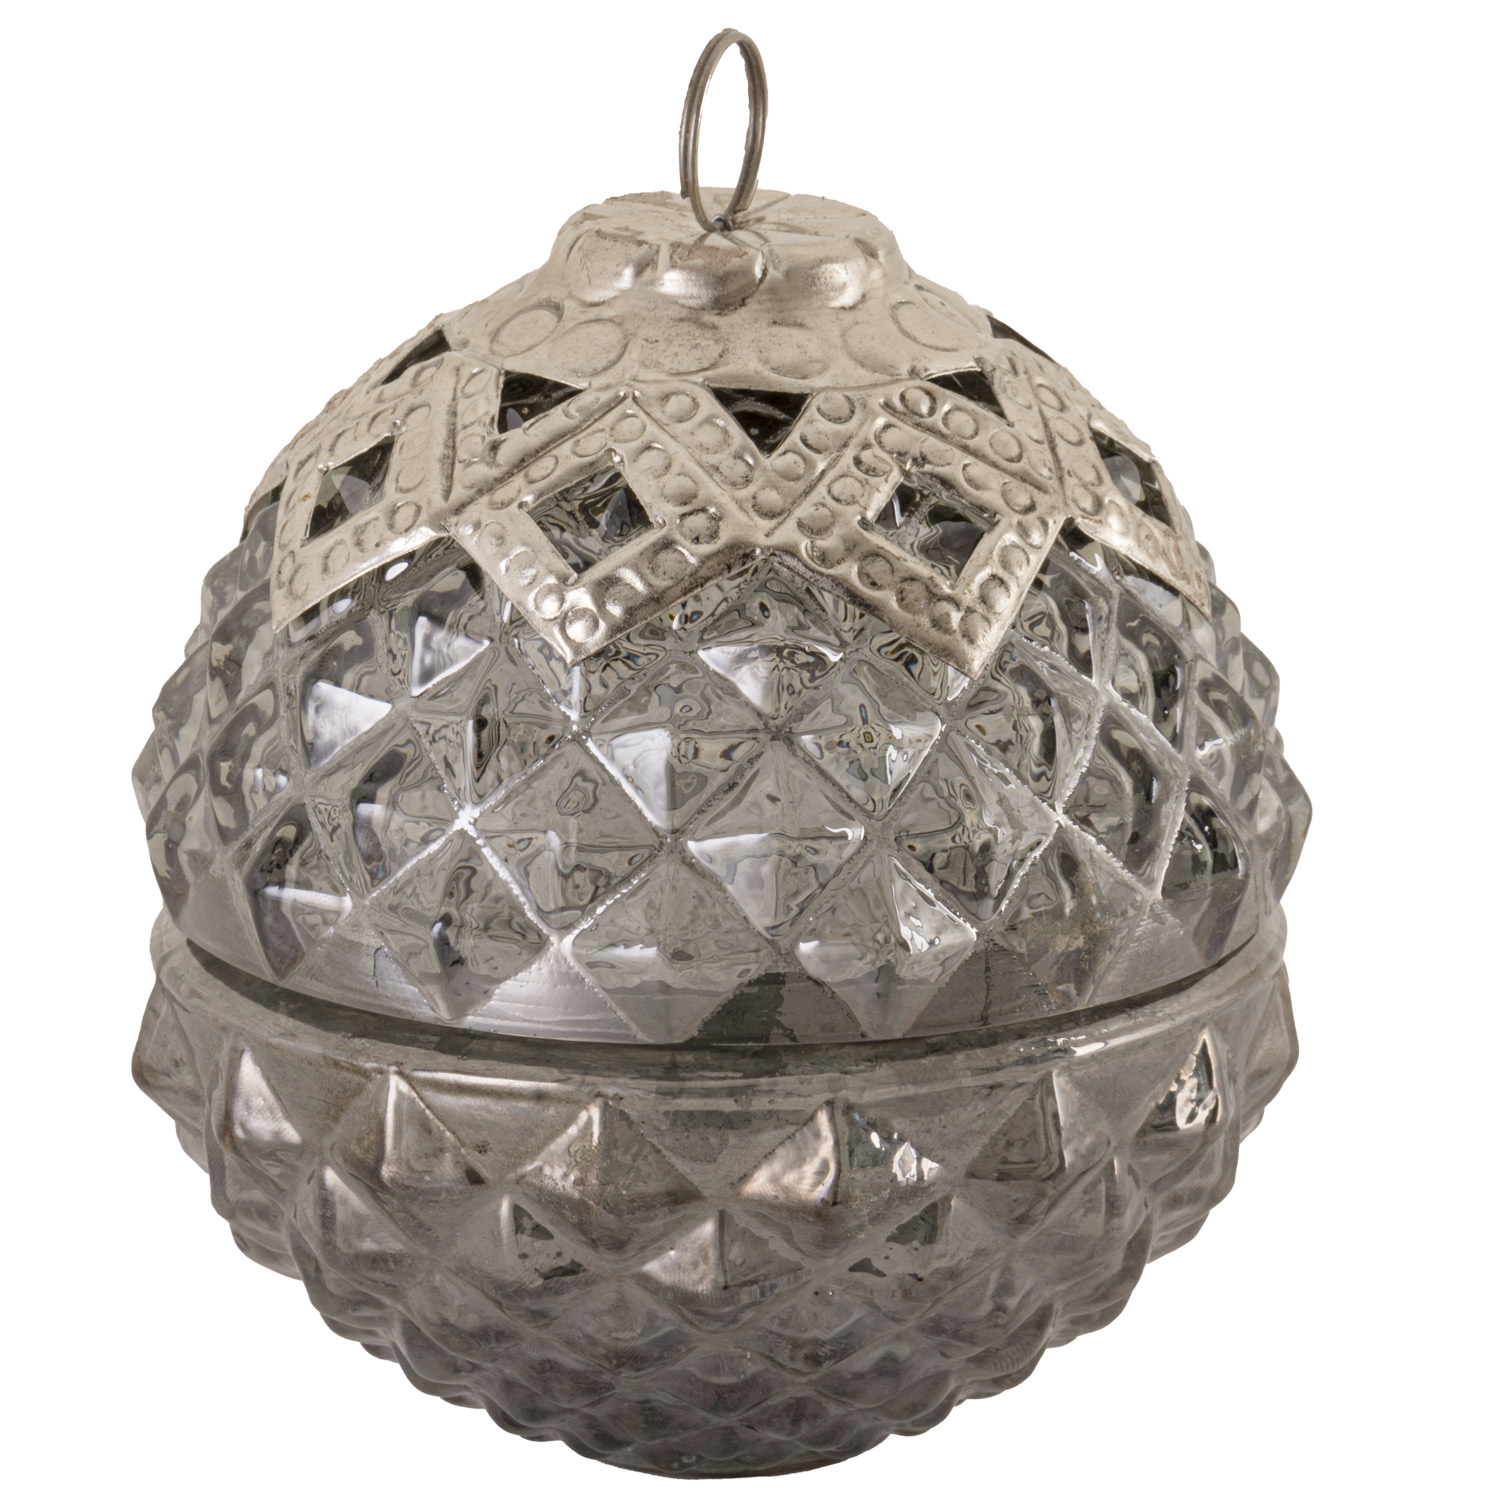 Noel Collection Midnight Filigree Crested Trinket Bauble - Image 1